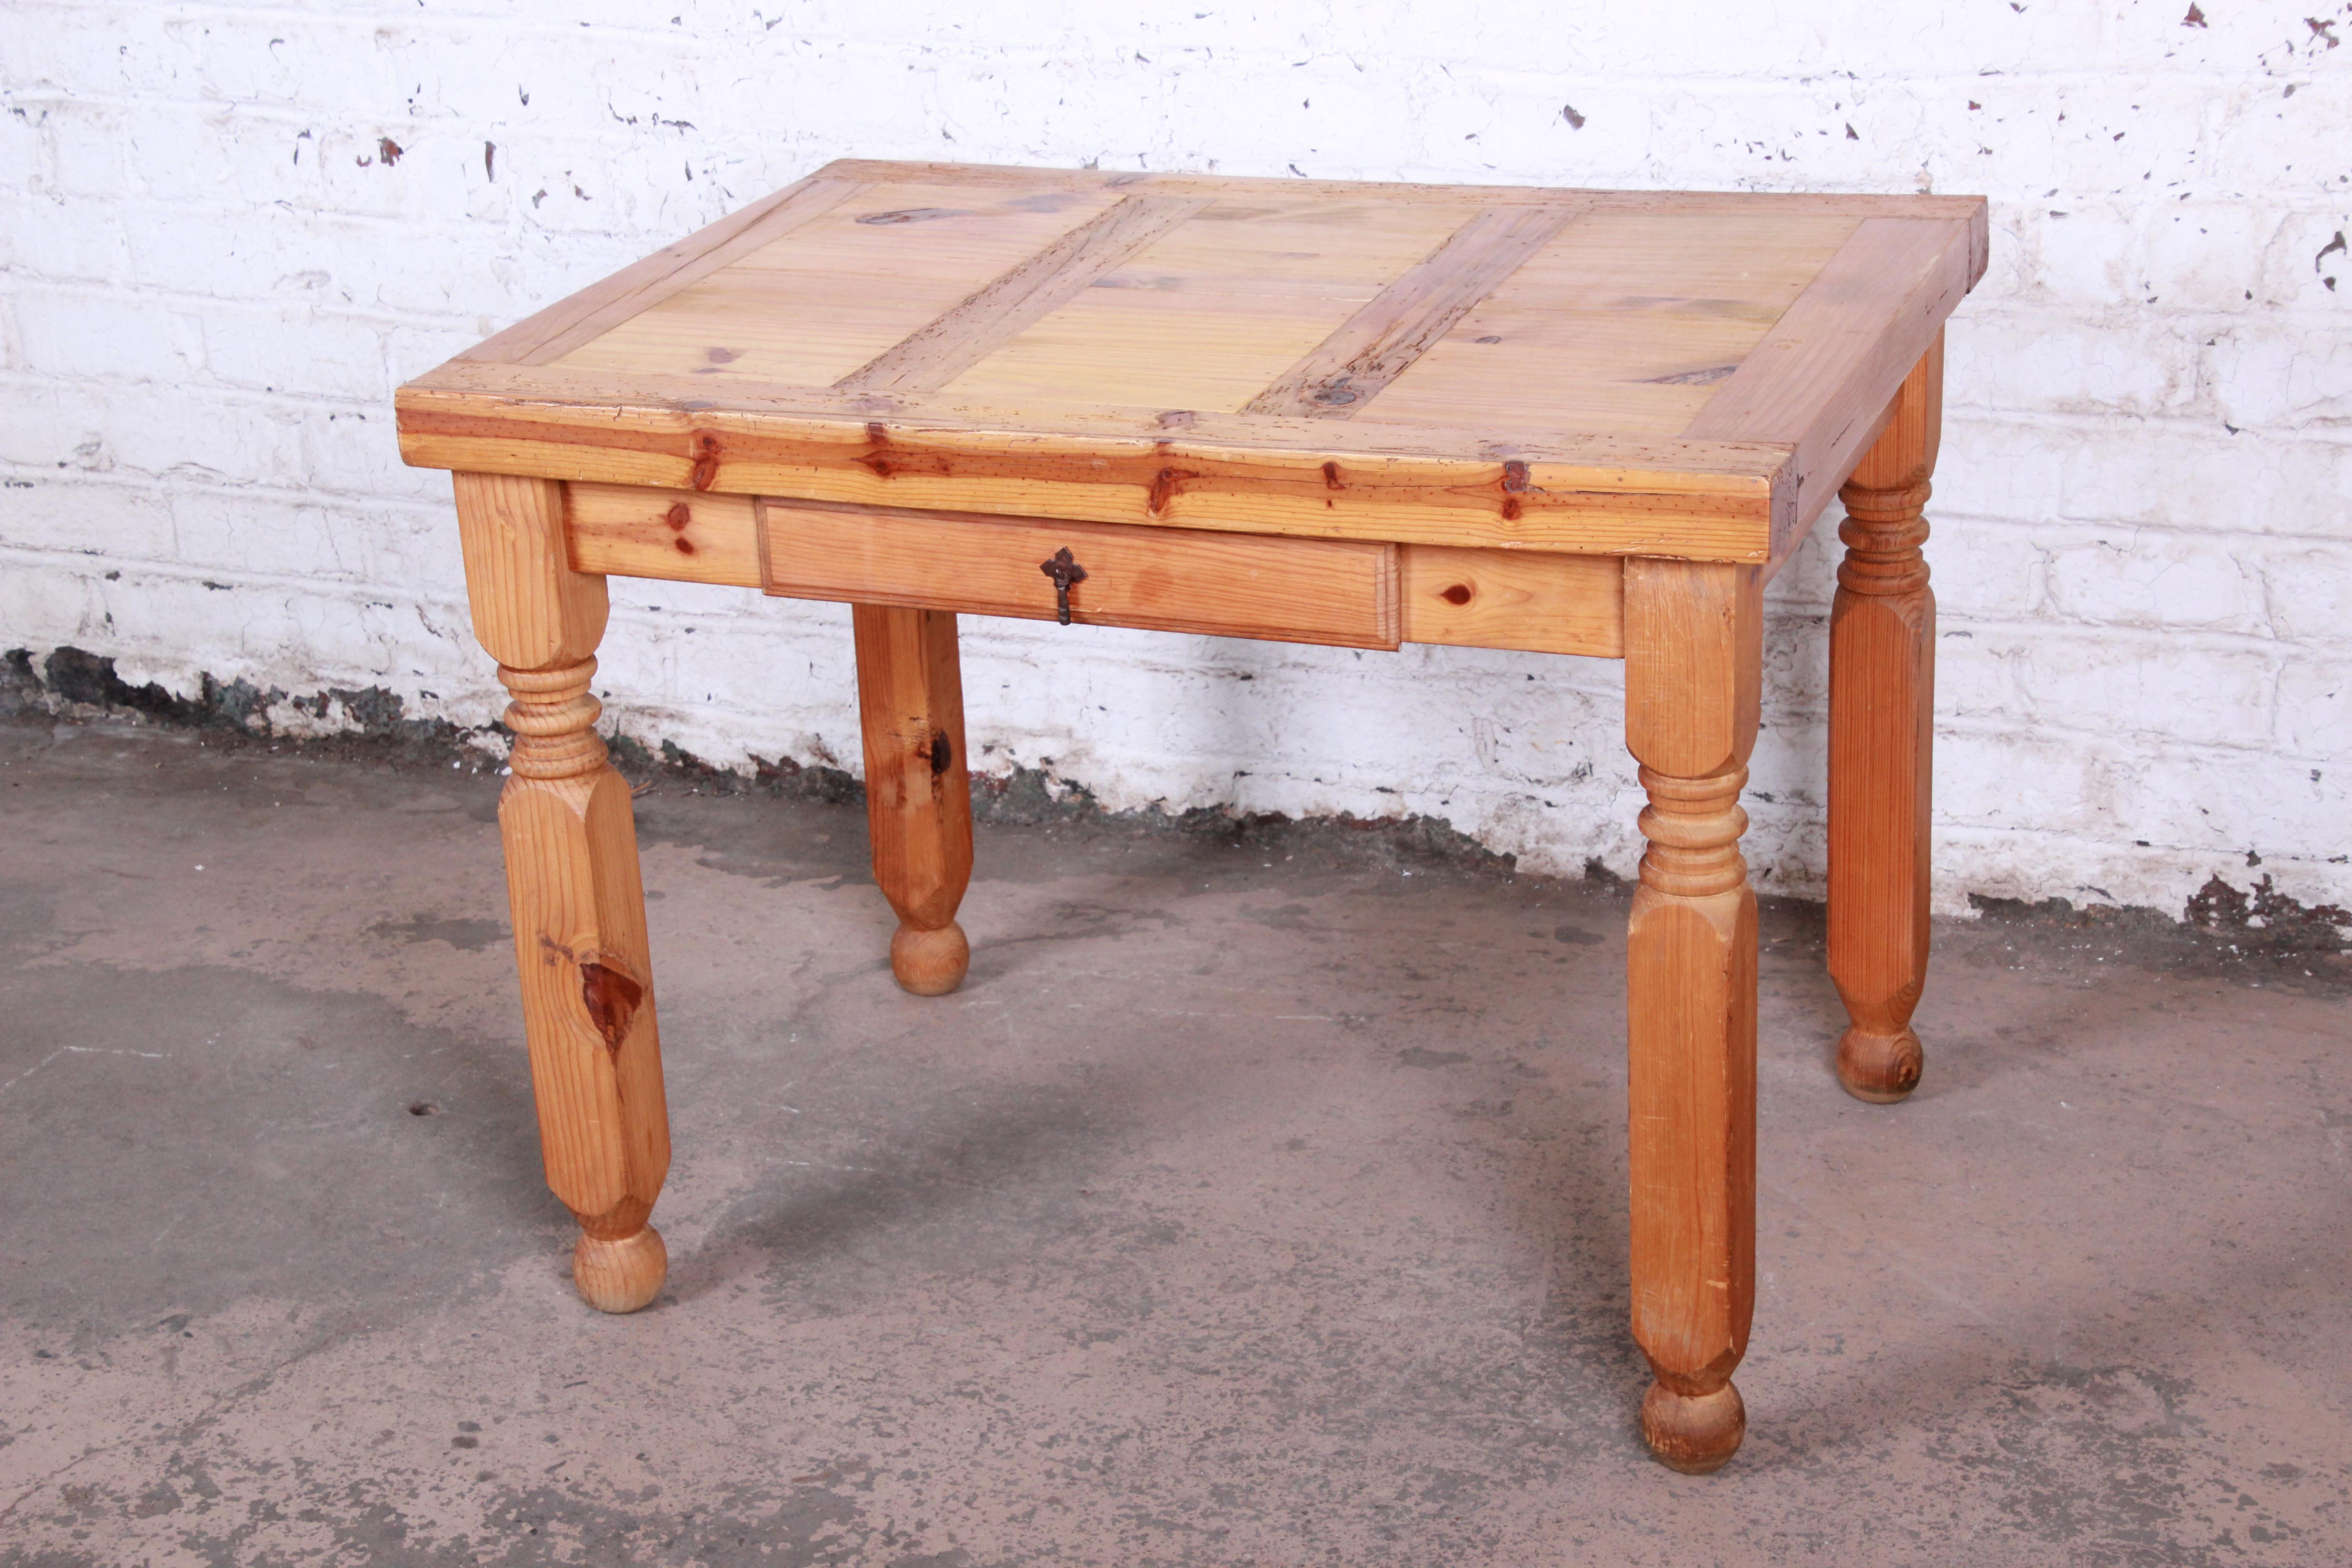 A gorgeous primitive rustic pine writing desk. The desk features solid wood construction and beautiful knotty pine wood grain. It has a single drawer for storage. The desk is finished on all sides. It is in very good original vintage condition.